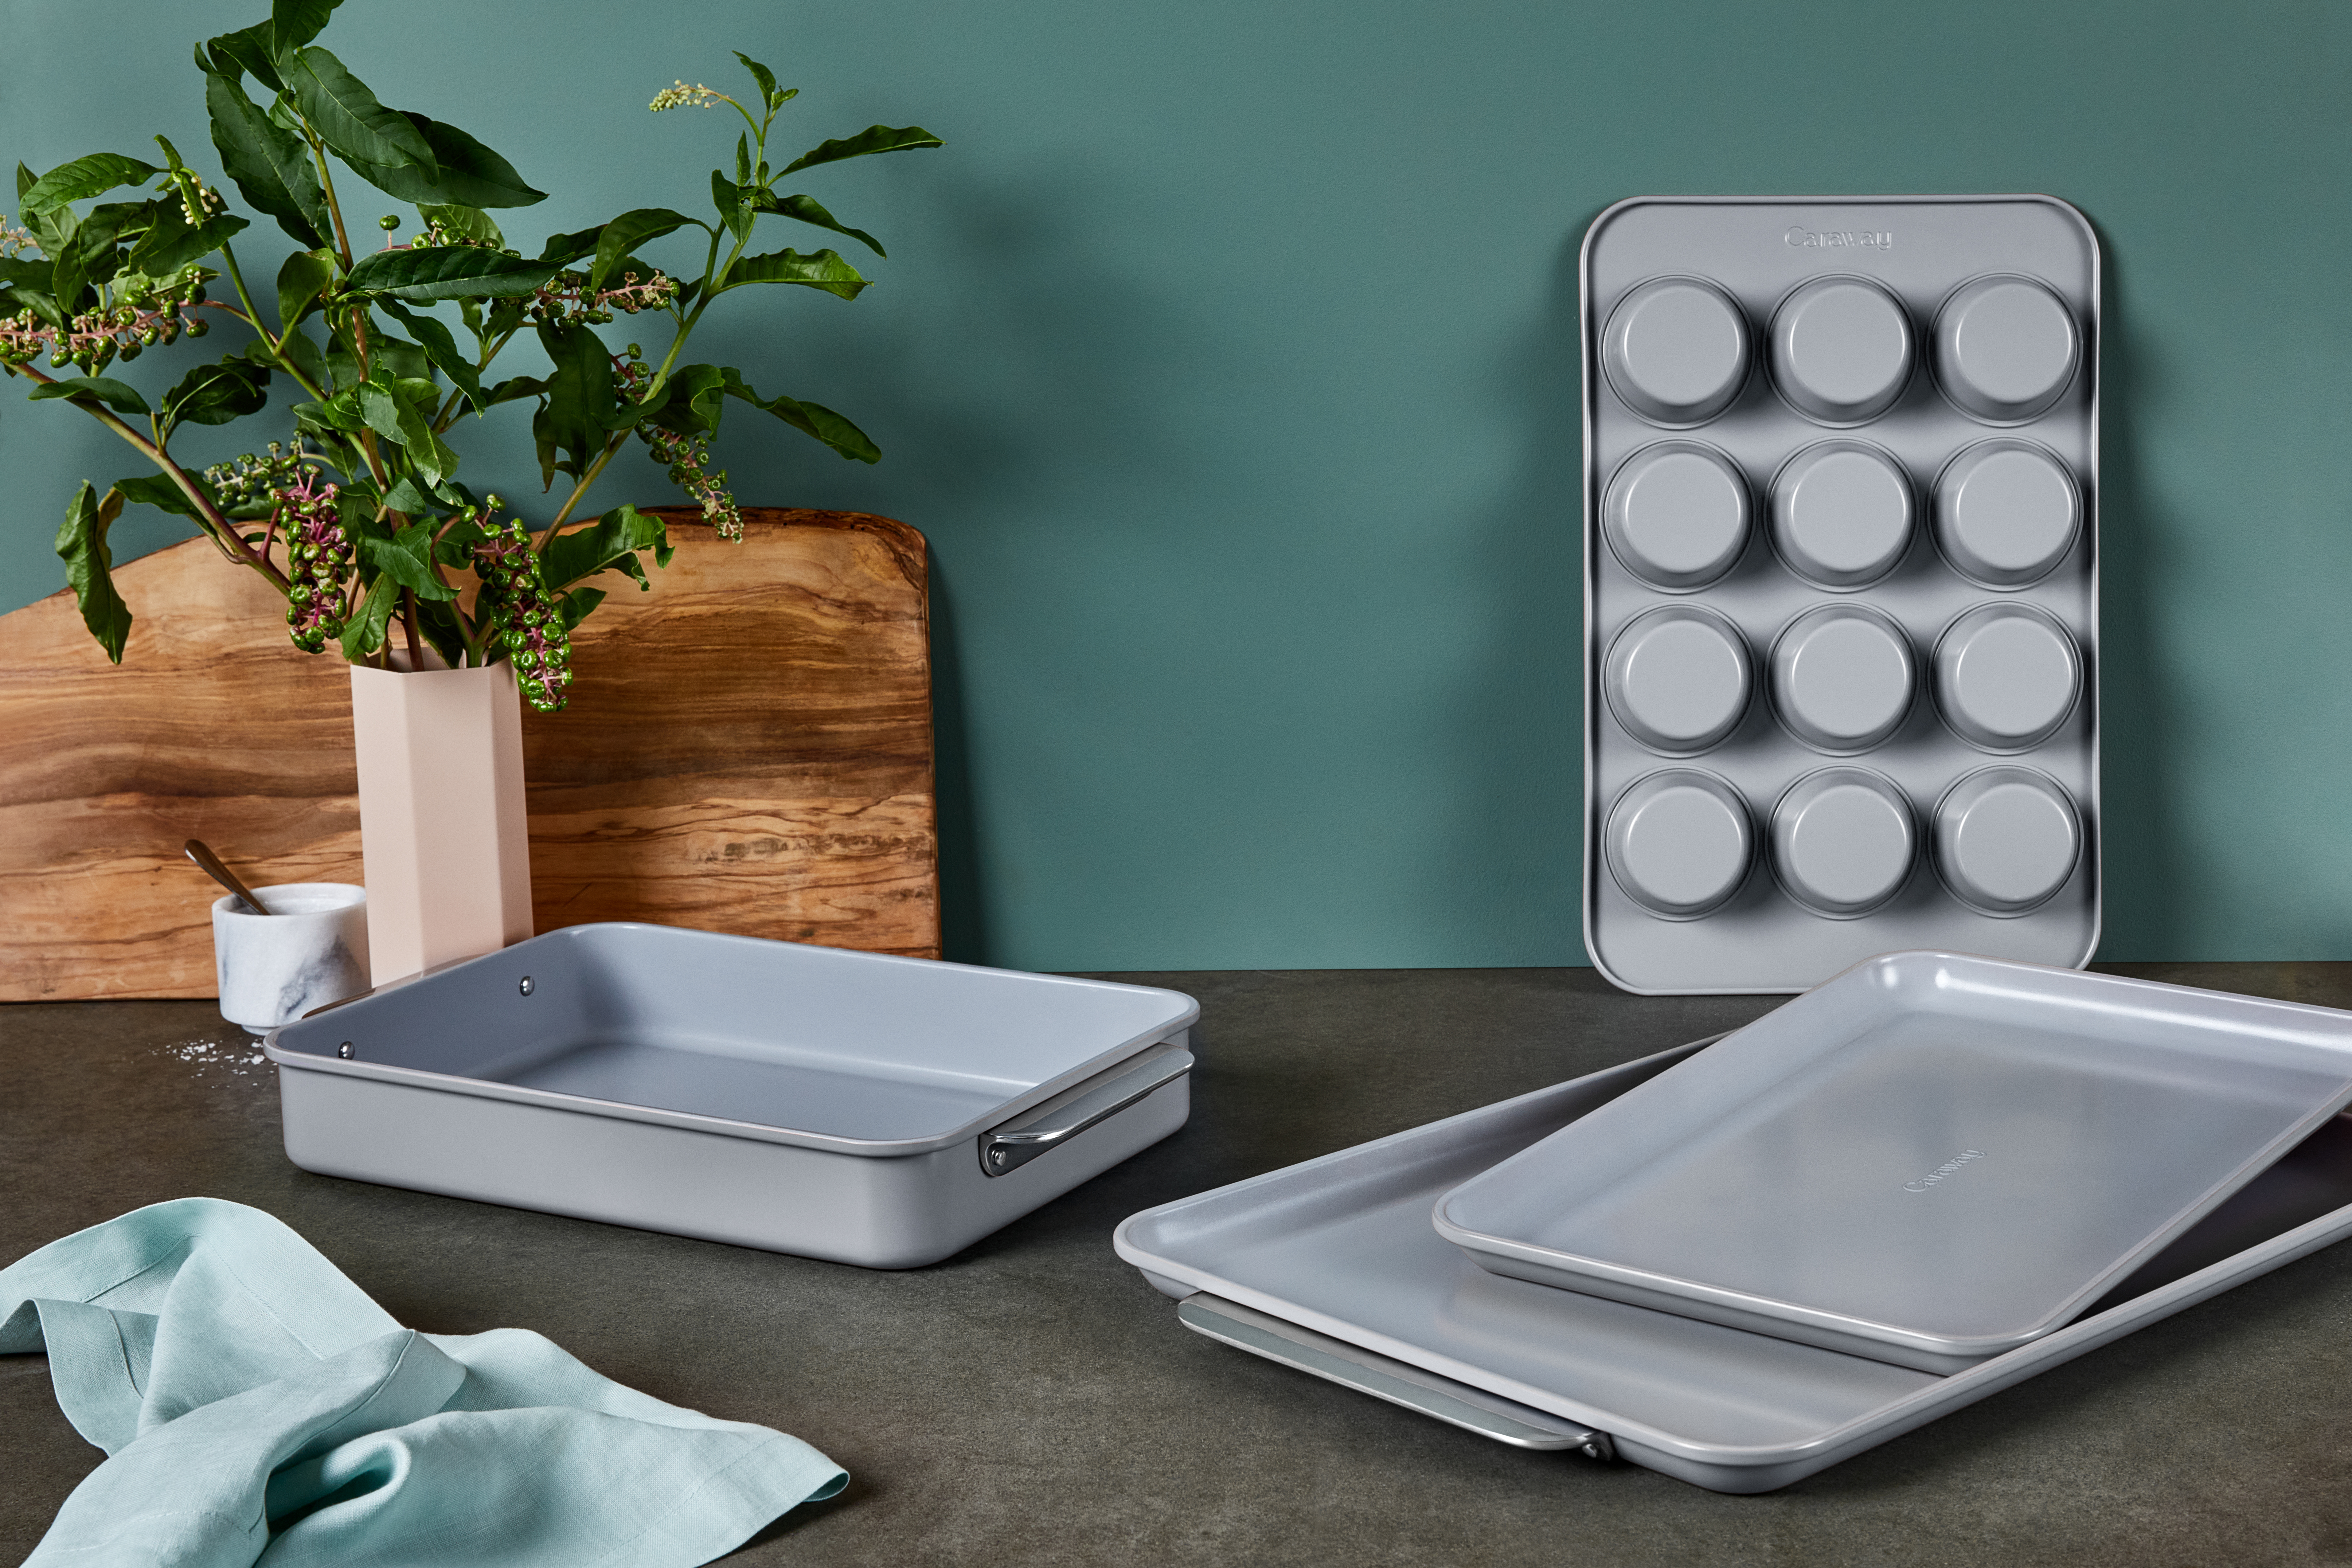 The half bakeware set featuring oven trays, baking sheets, and muffin pans